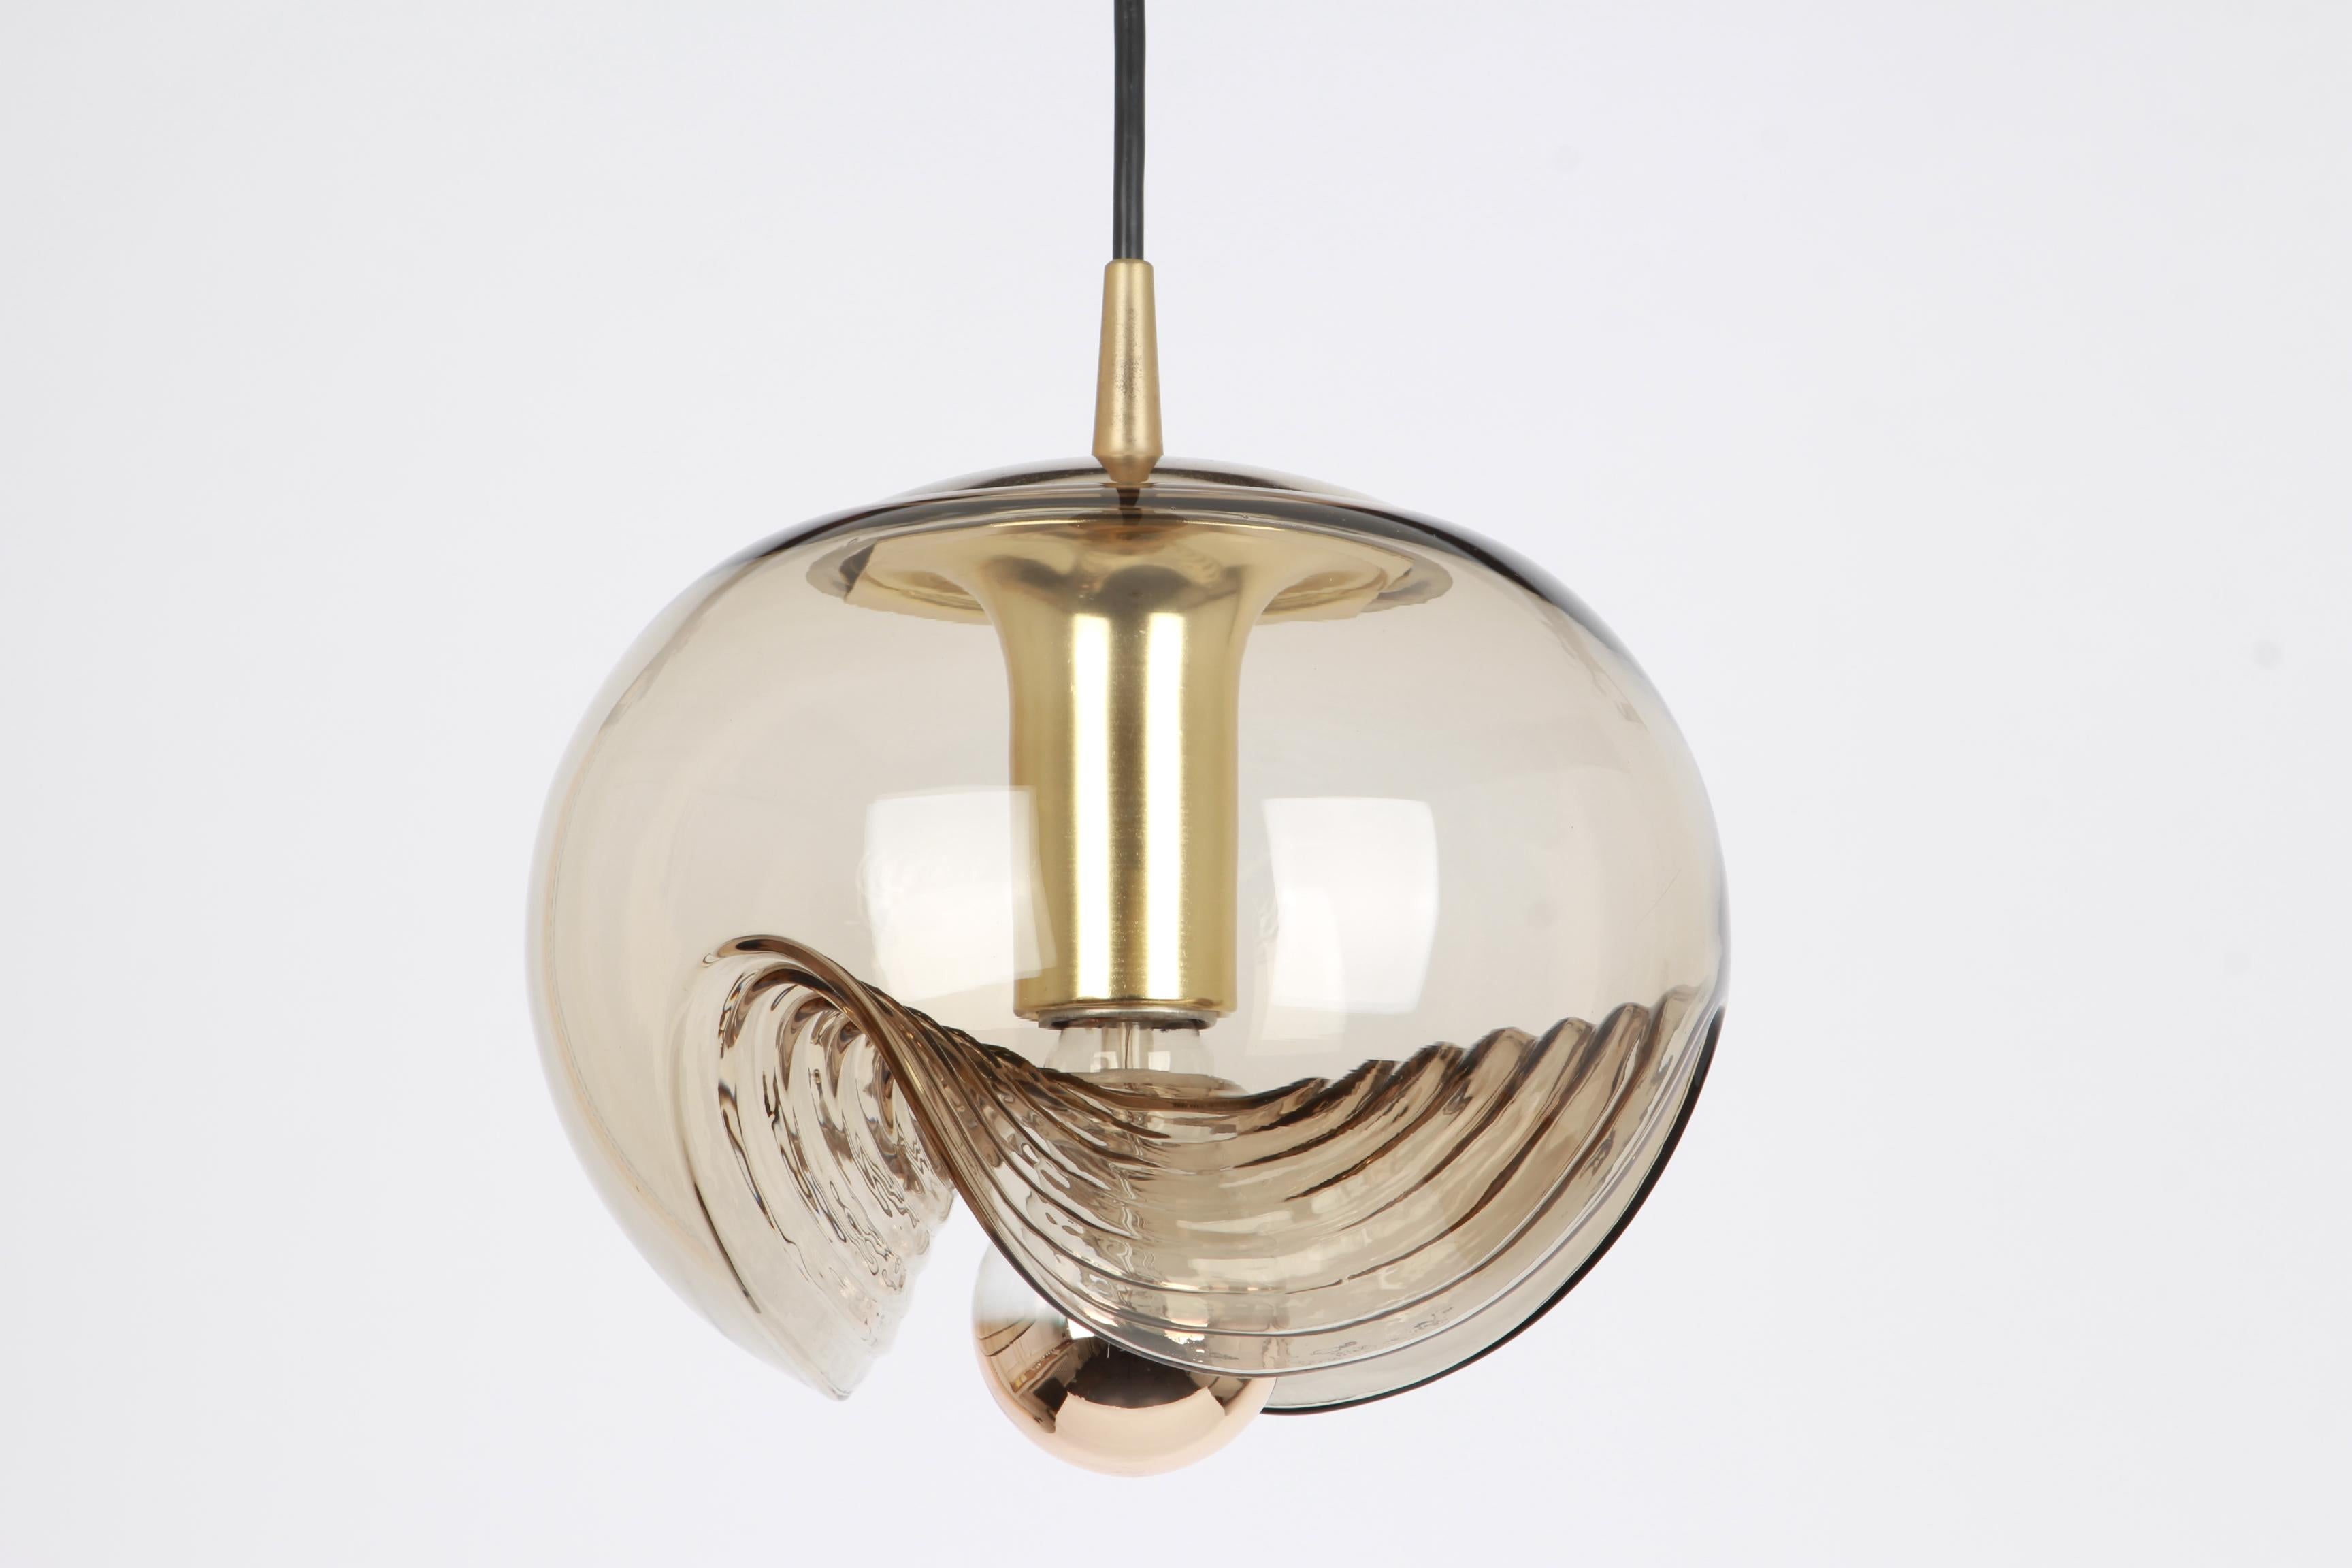 A special round biomorphic smoked glass pendant designed by Koch & Lowy for Peill & Putzler, manufactured in Germany, circa 1970s.

High quality and in very good condition. Cleaned, well-wired and ready to use. 

Each fixture requires 1 x E27